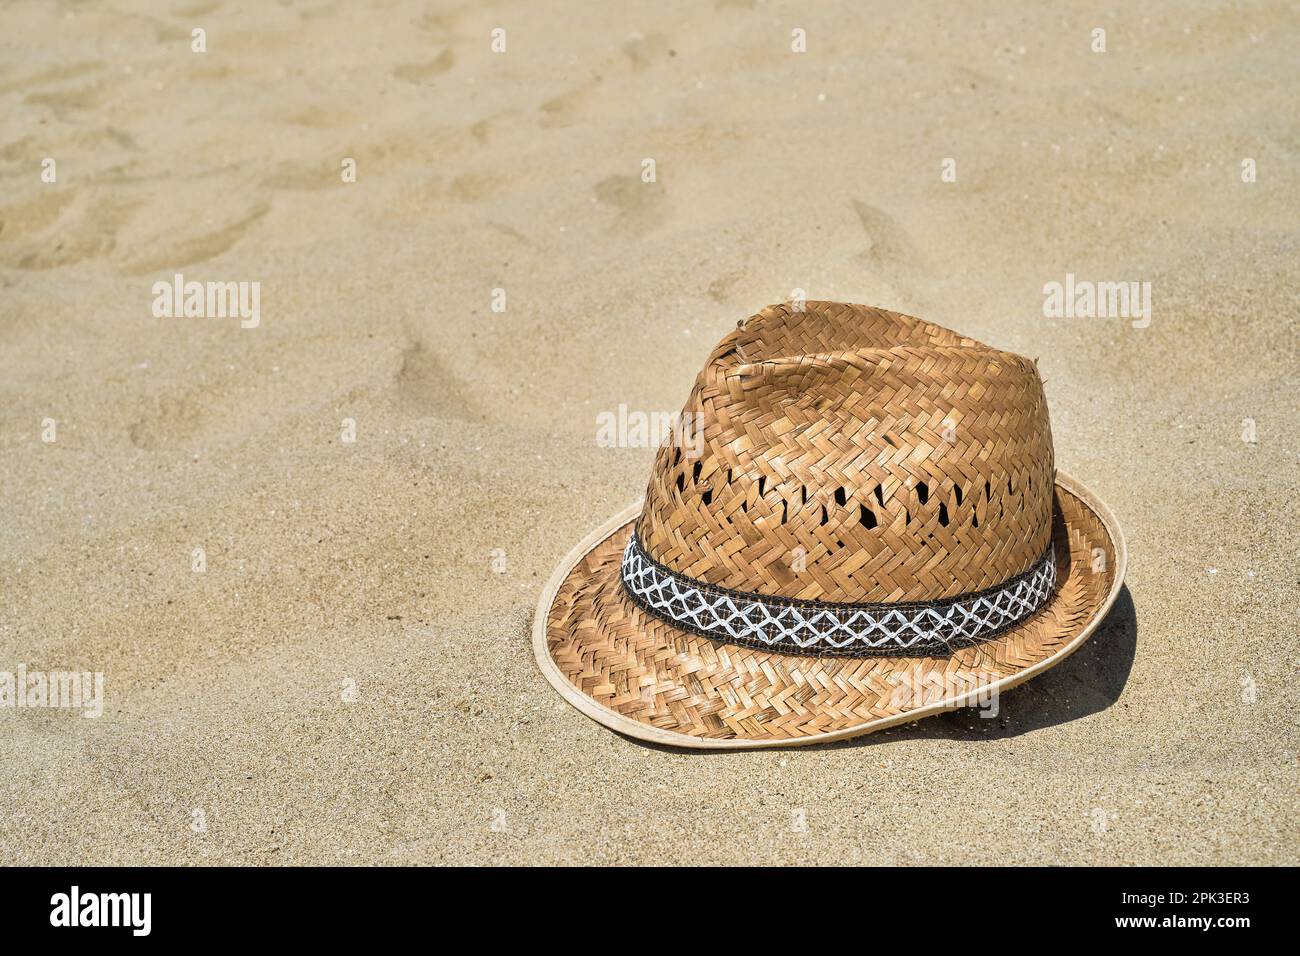 https://c8.alamy.com/comp/2PK3ER3/mens-straw-beach-hat-on-the-sand-at-the-beach-close-up-copy-space-for-text-a-beautiful-sunny-day-vacation-summer-concept-2PK3ER3.jpg